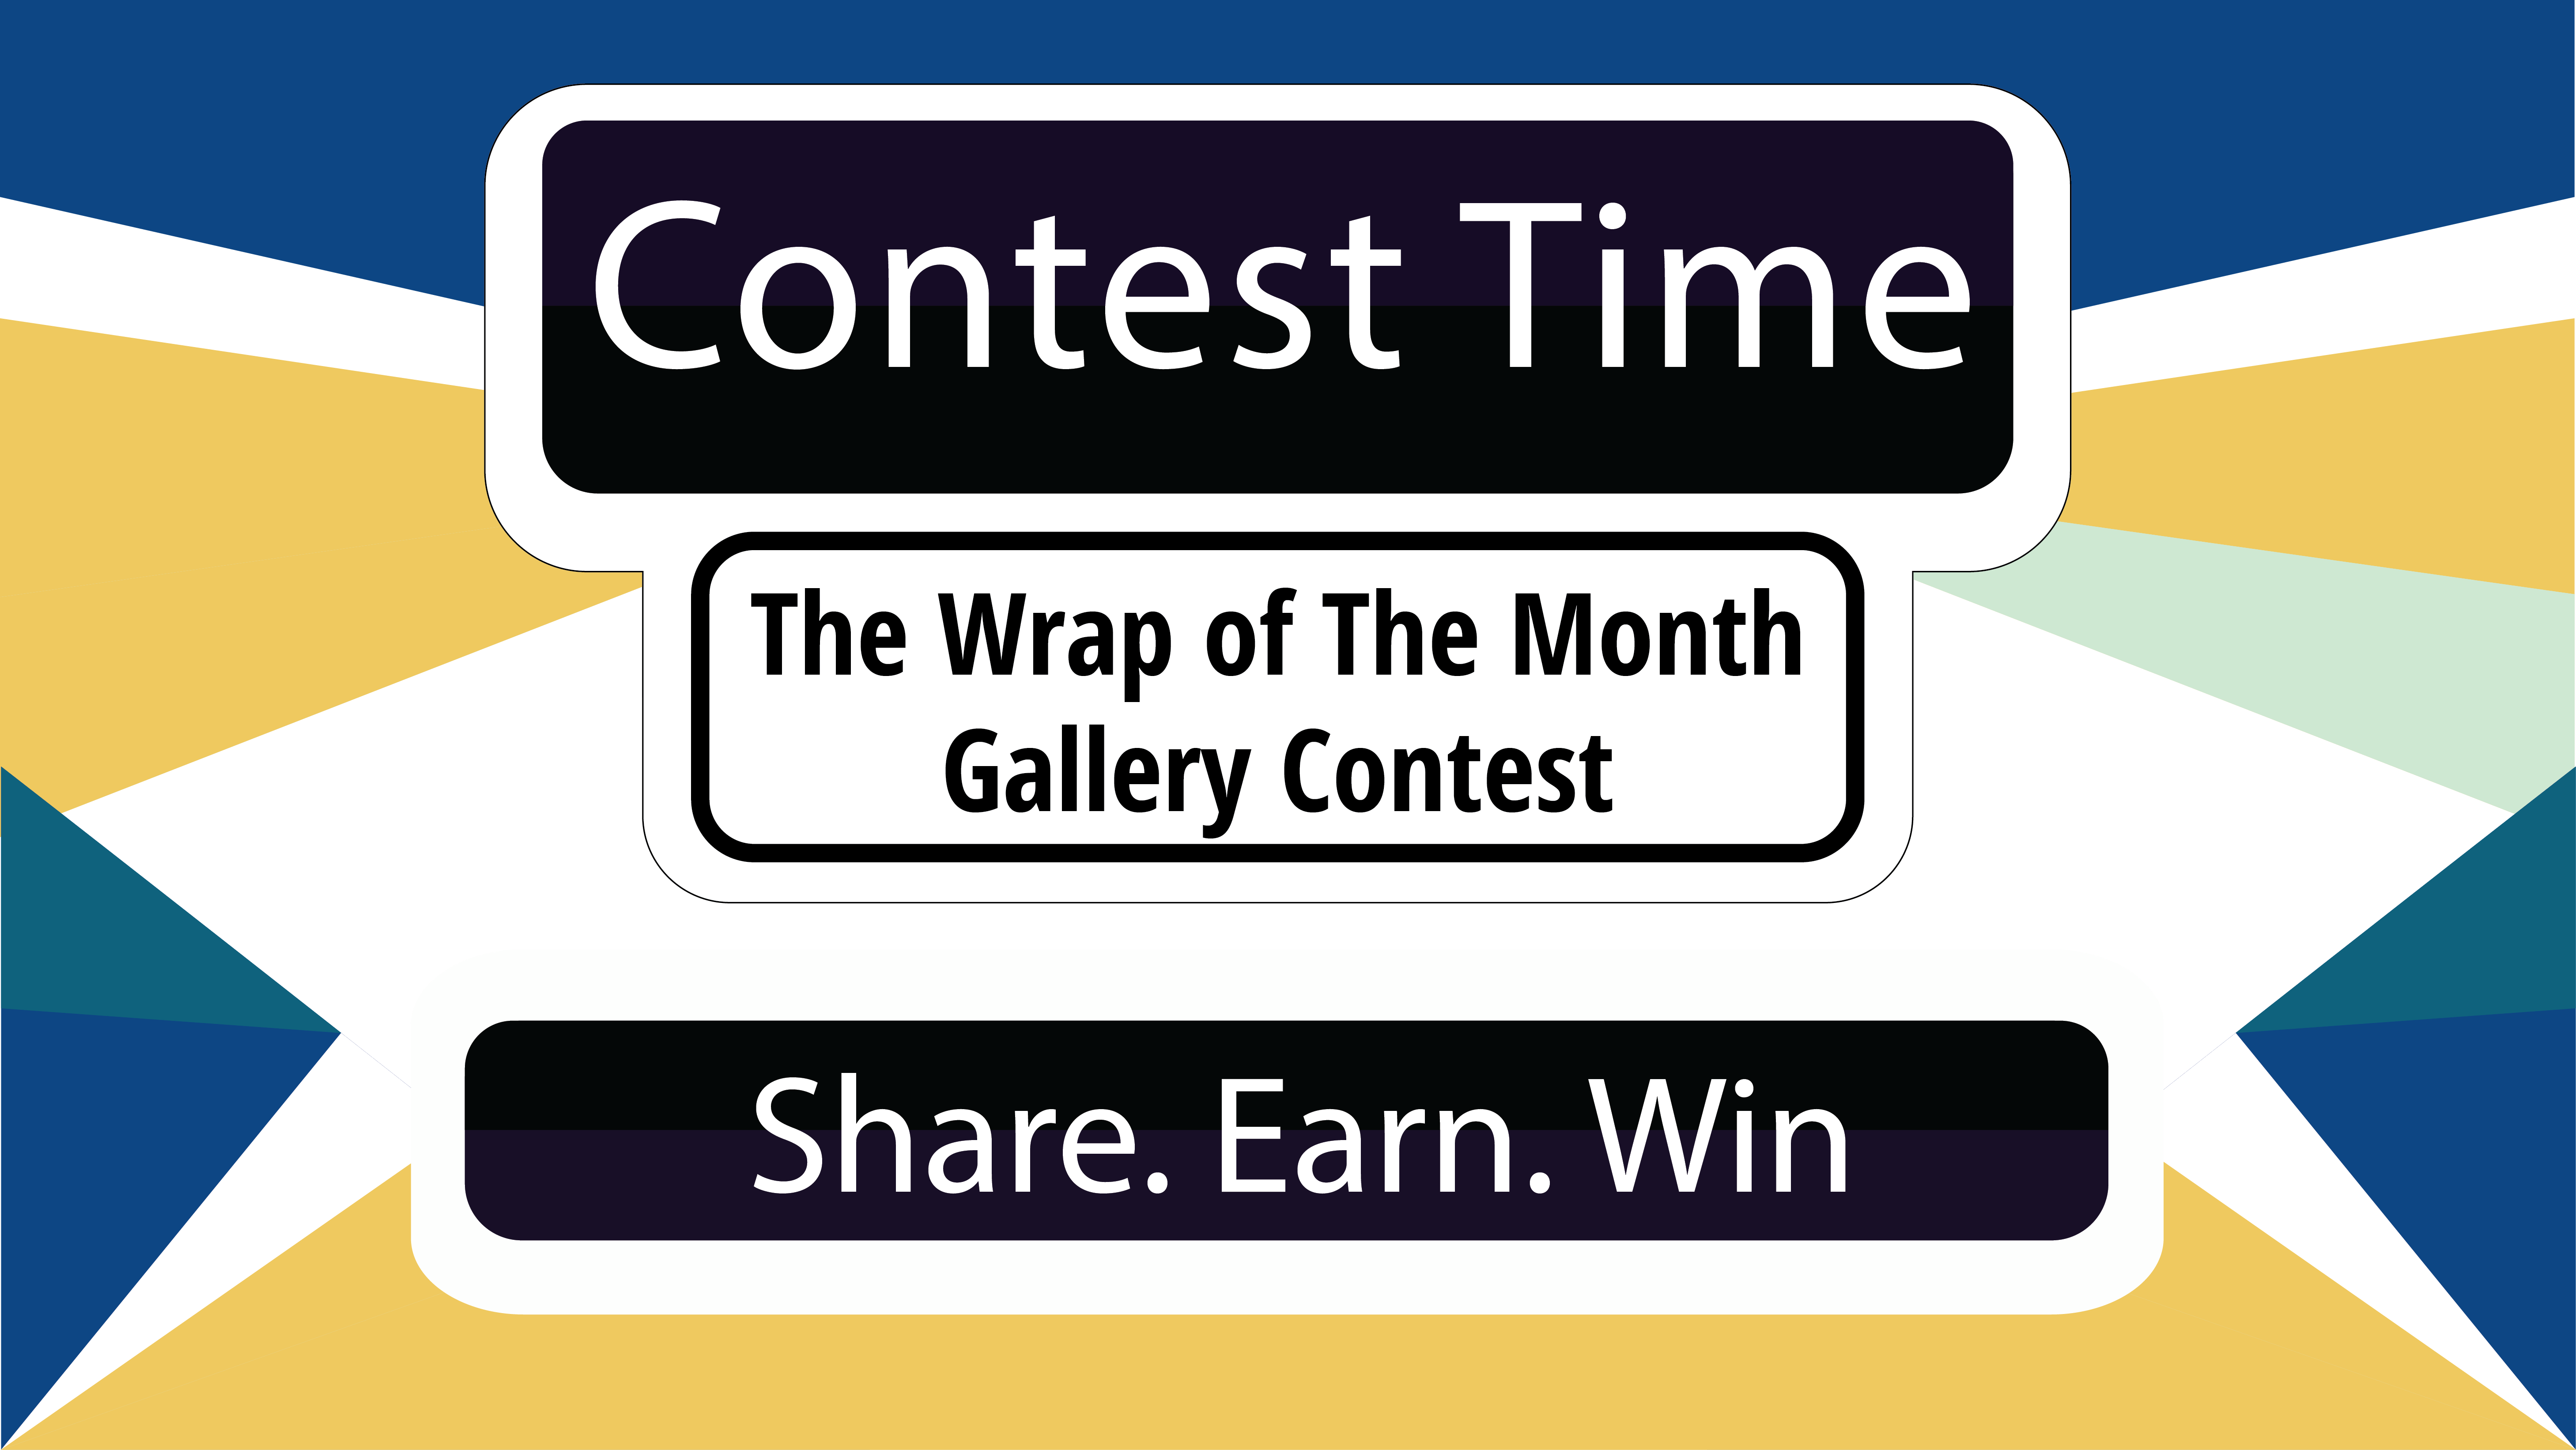 Contest Time! The Wrap of The Month Gallery Contest... Share. Earn. Win!